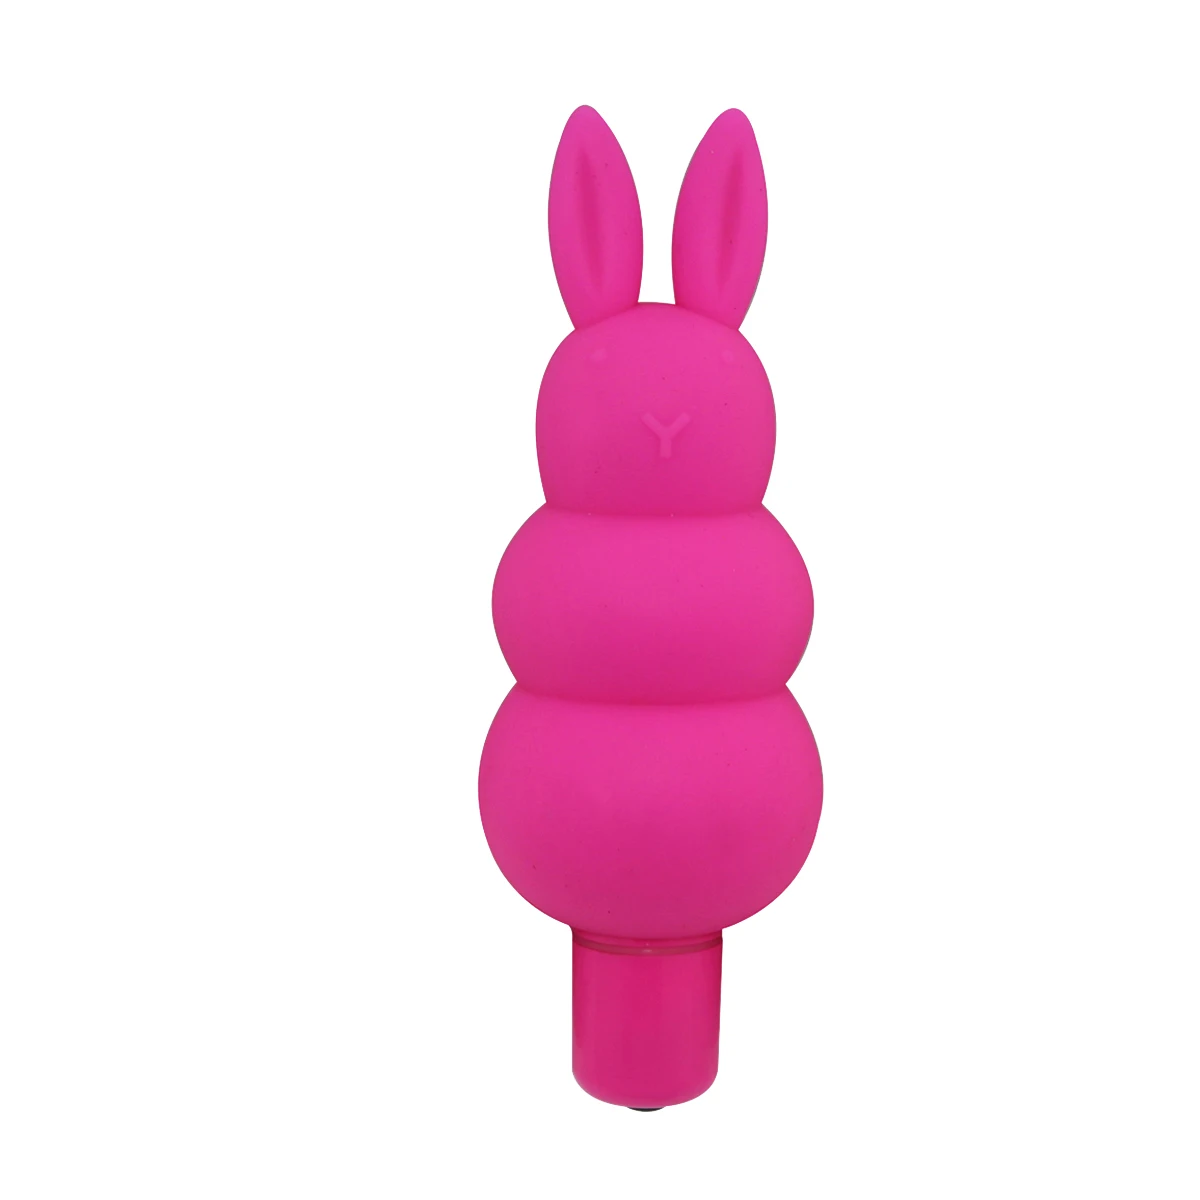 Bunny Vibrator For Womengirl Vagina Sexs Toys Buy Electric Vibrators For Womenvibrater For 